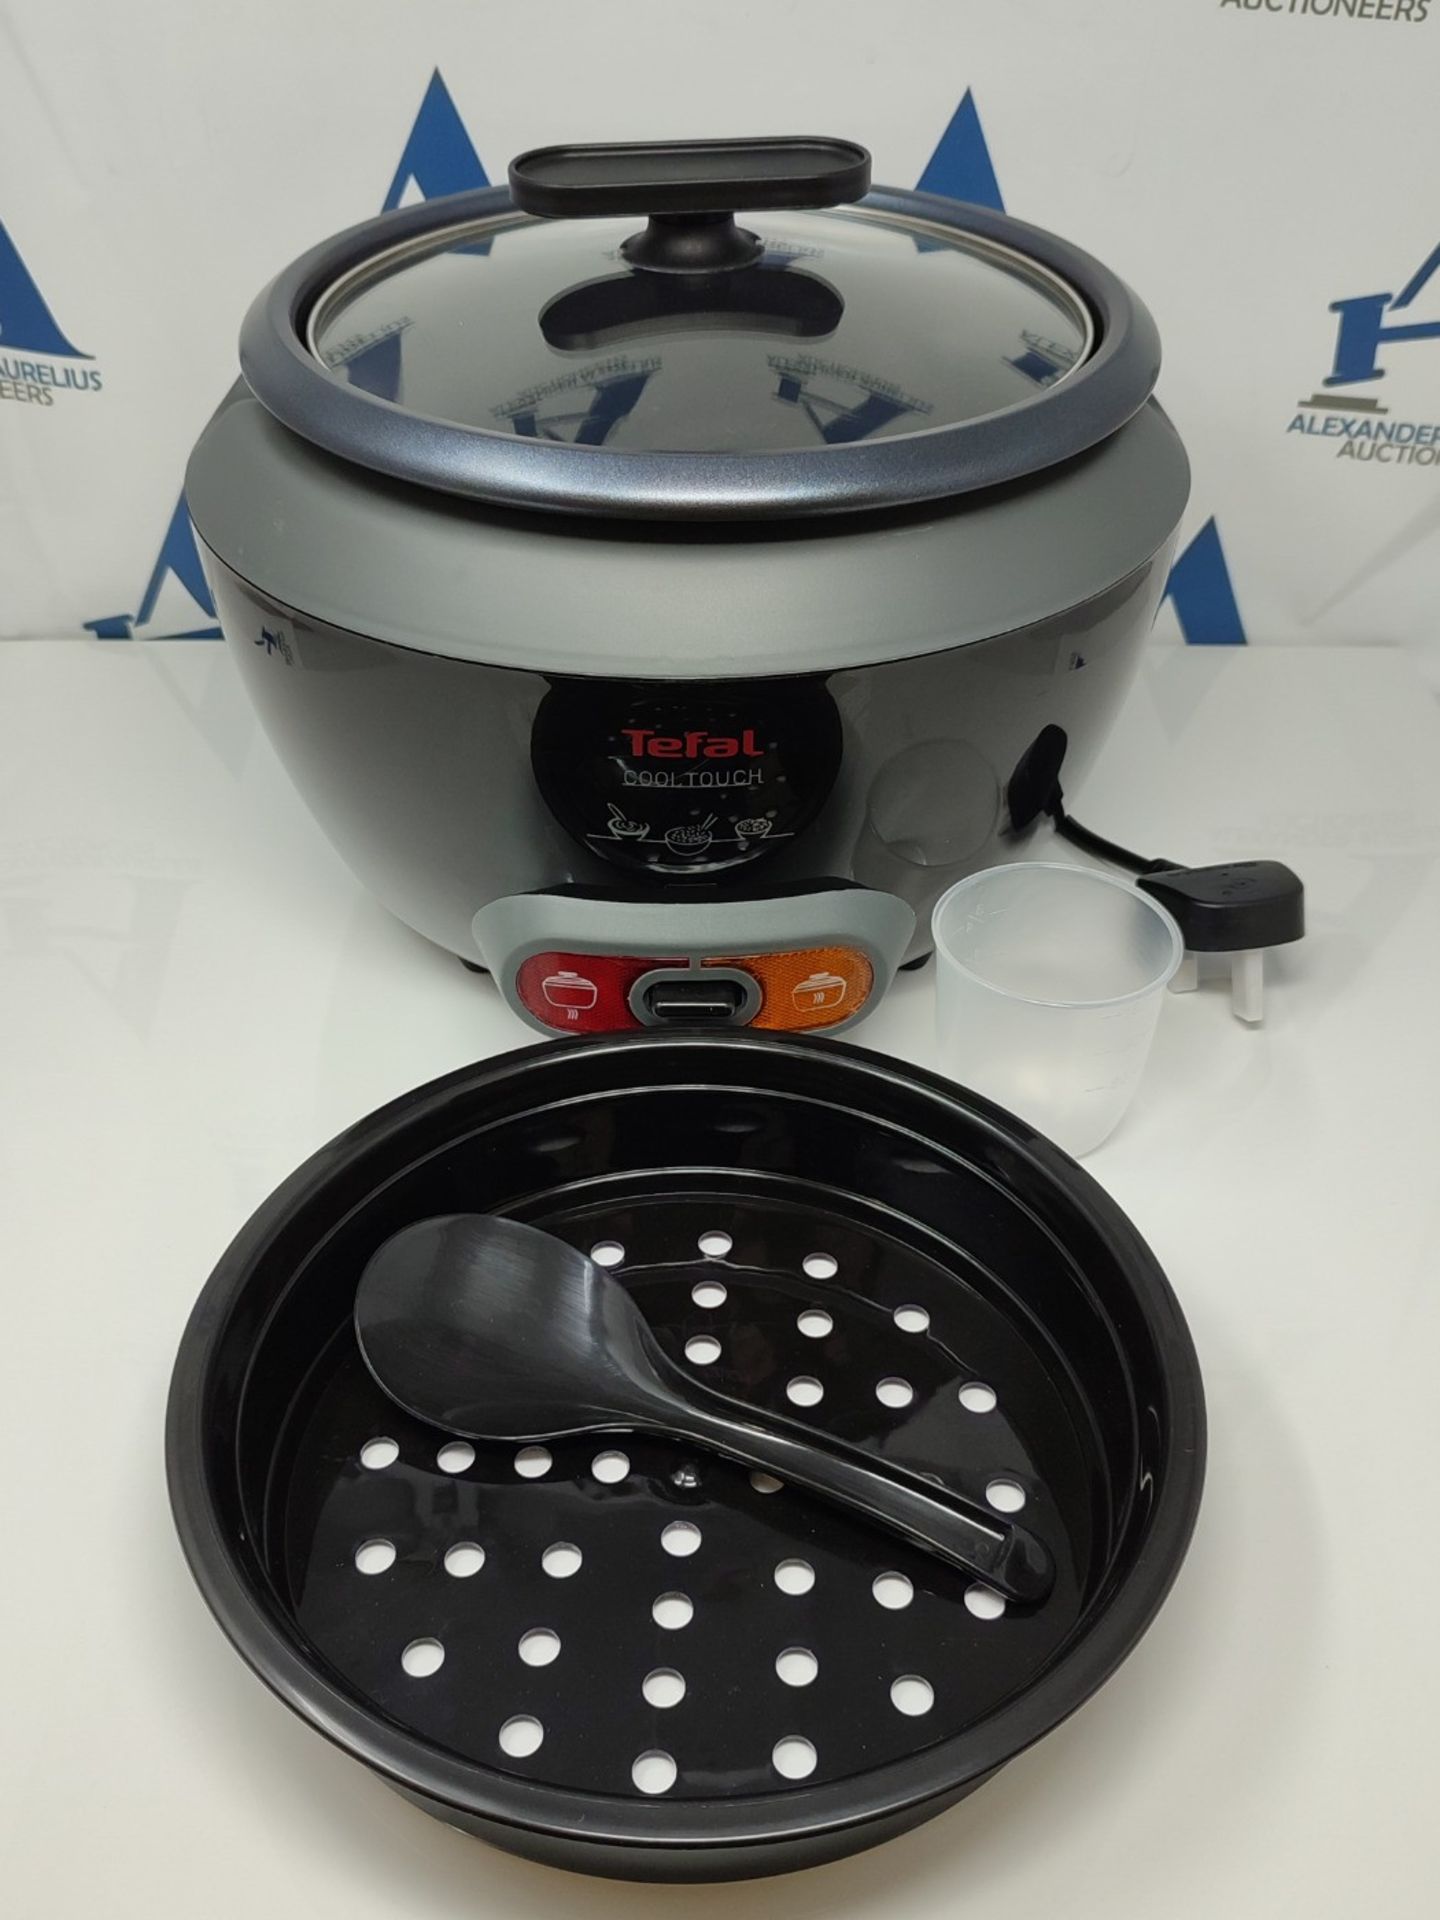 Tefal RK1568UK Cool Touch Rice Cooker, (20 Portions), 700 W, 1.8 Litre, Black - Image 3 of 3